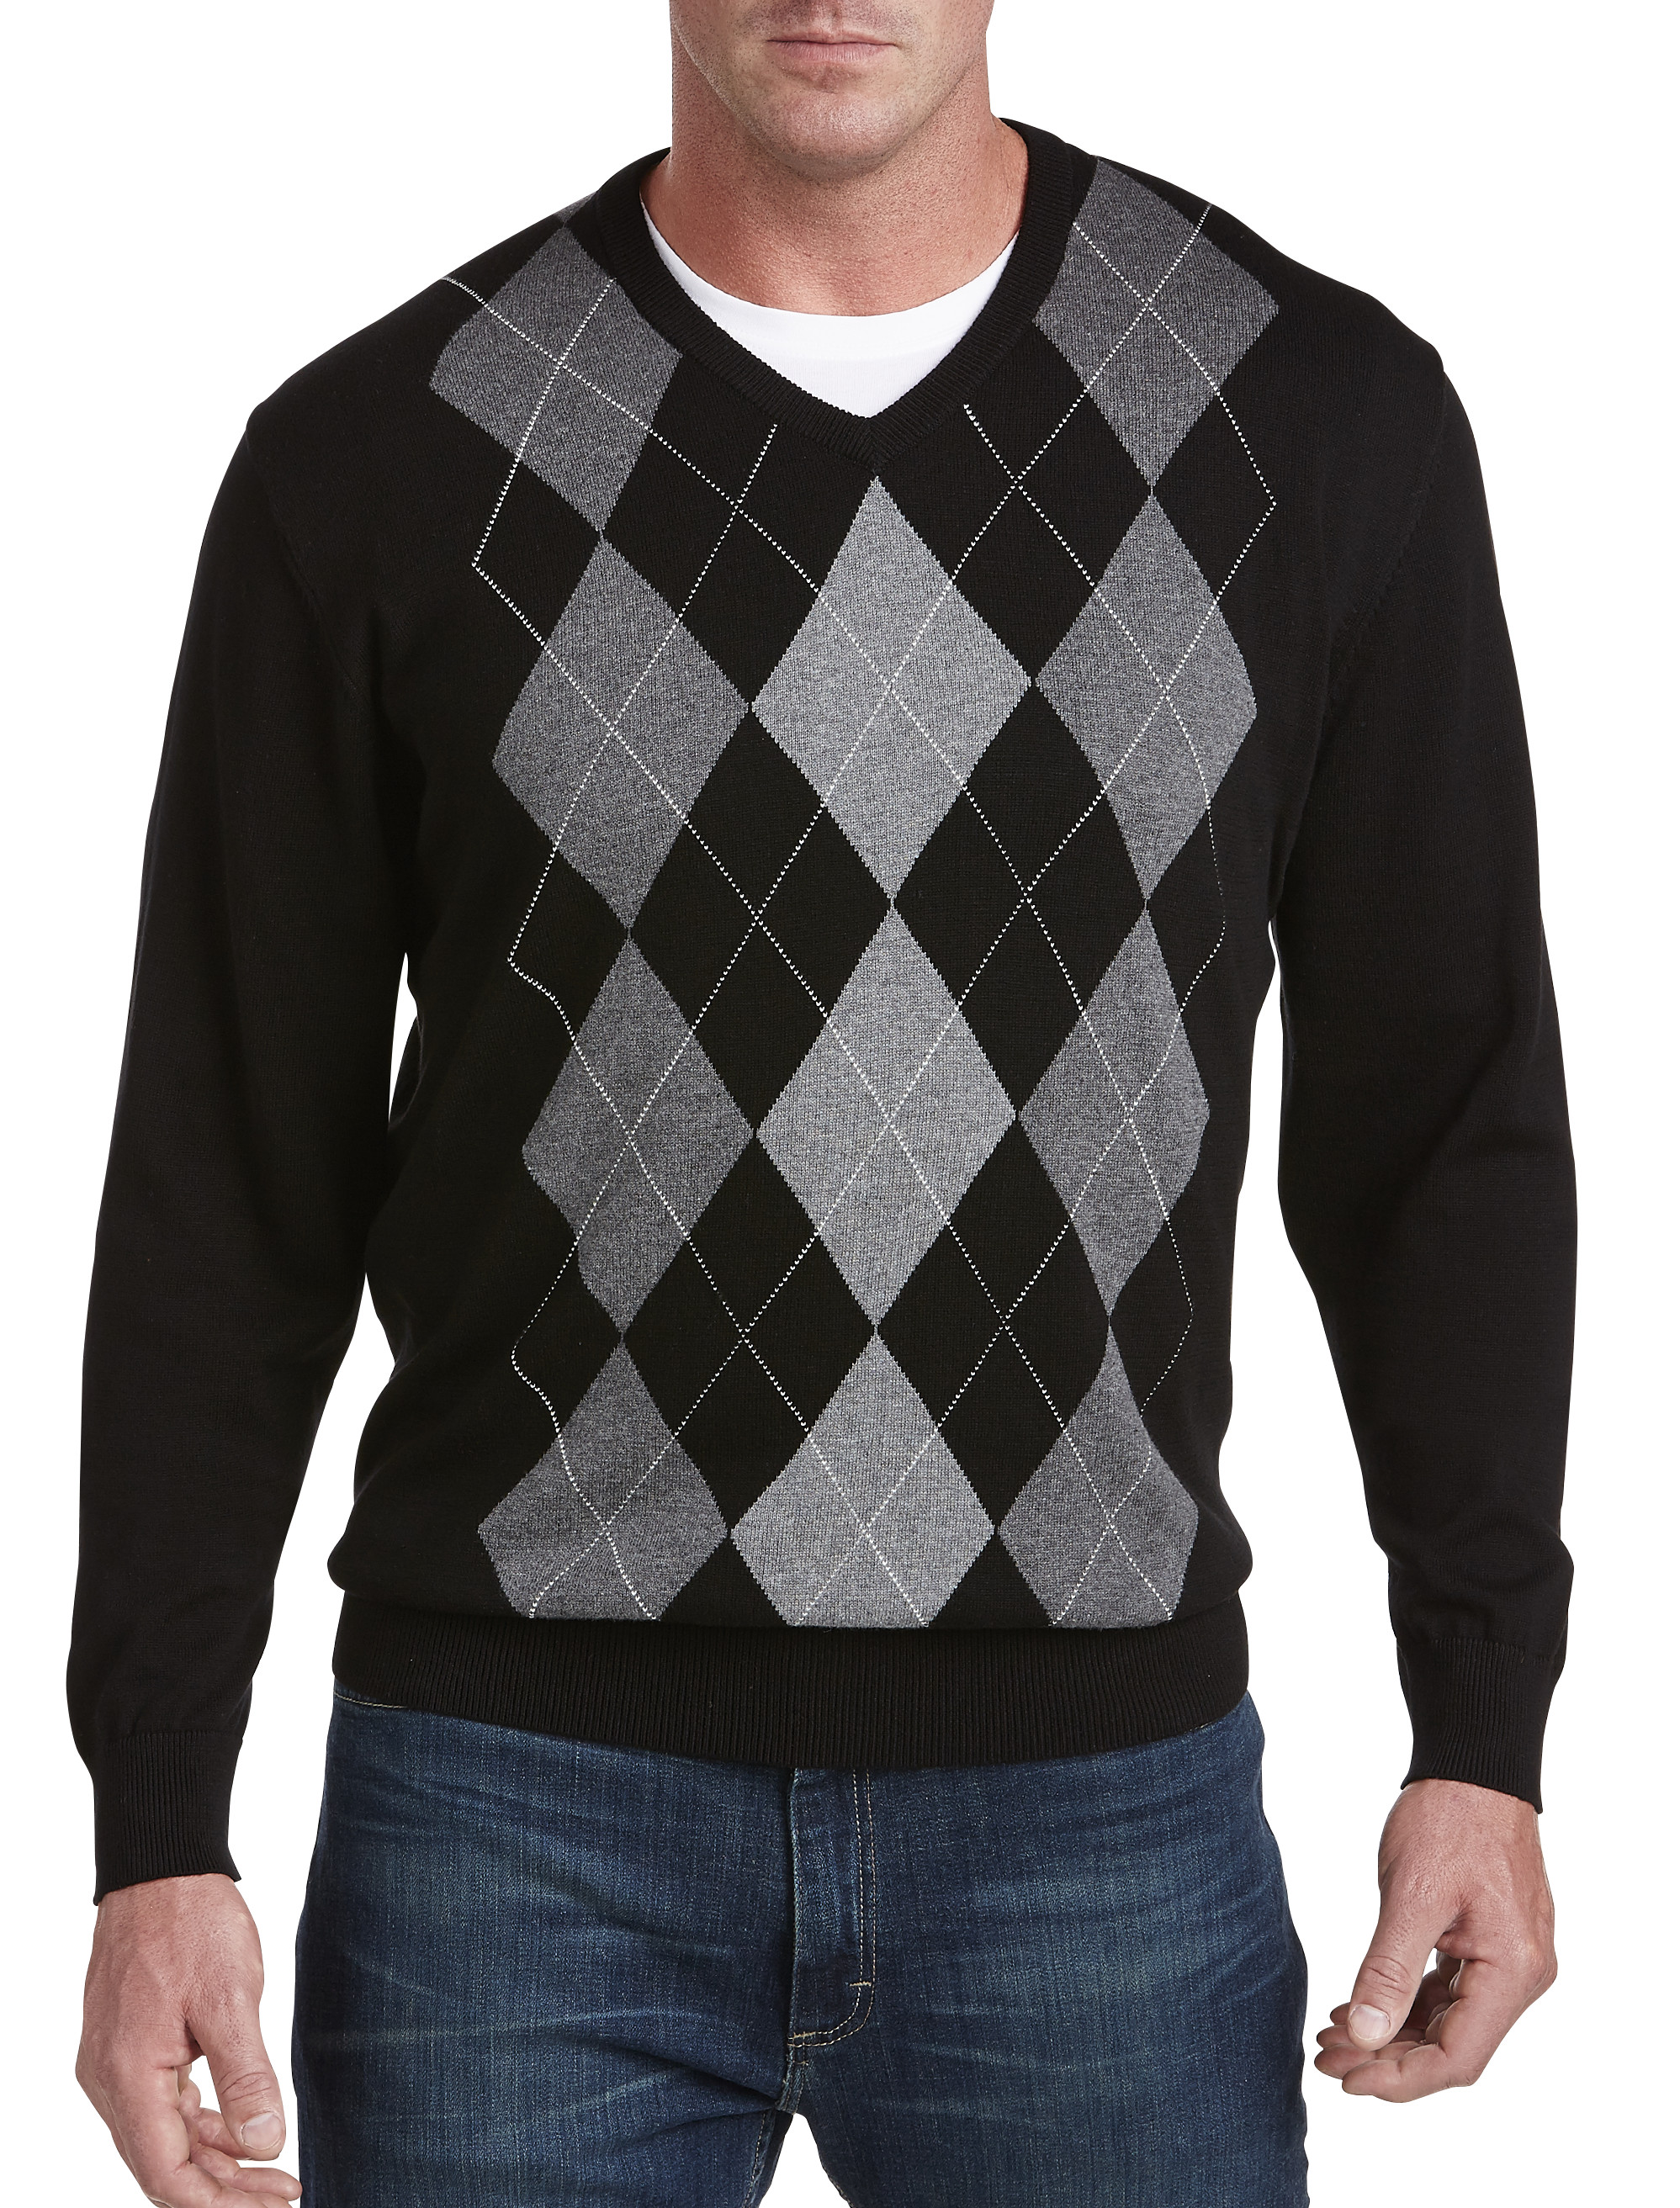 Big & Tall Sweaters and Sweater Vests for Men | CasualMaleXL